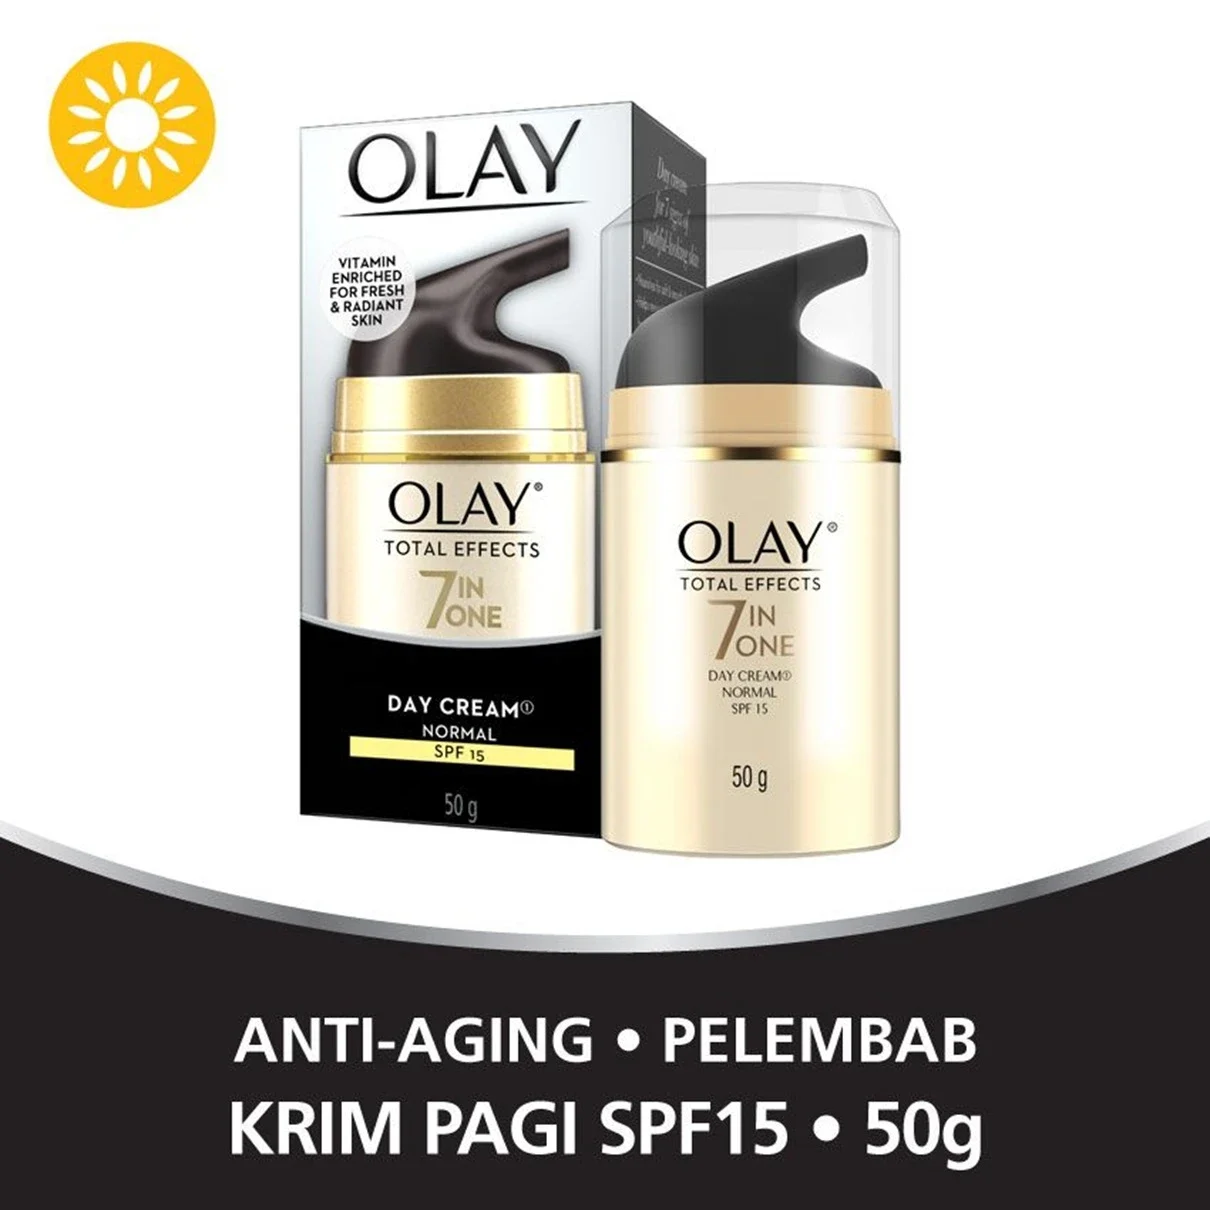 Olay Total Effects 7 in One Day Cream Gentle Spf 15